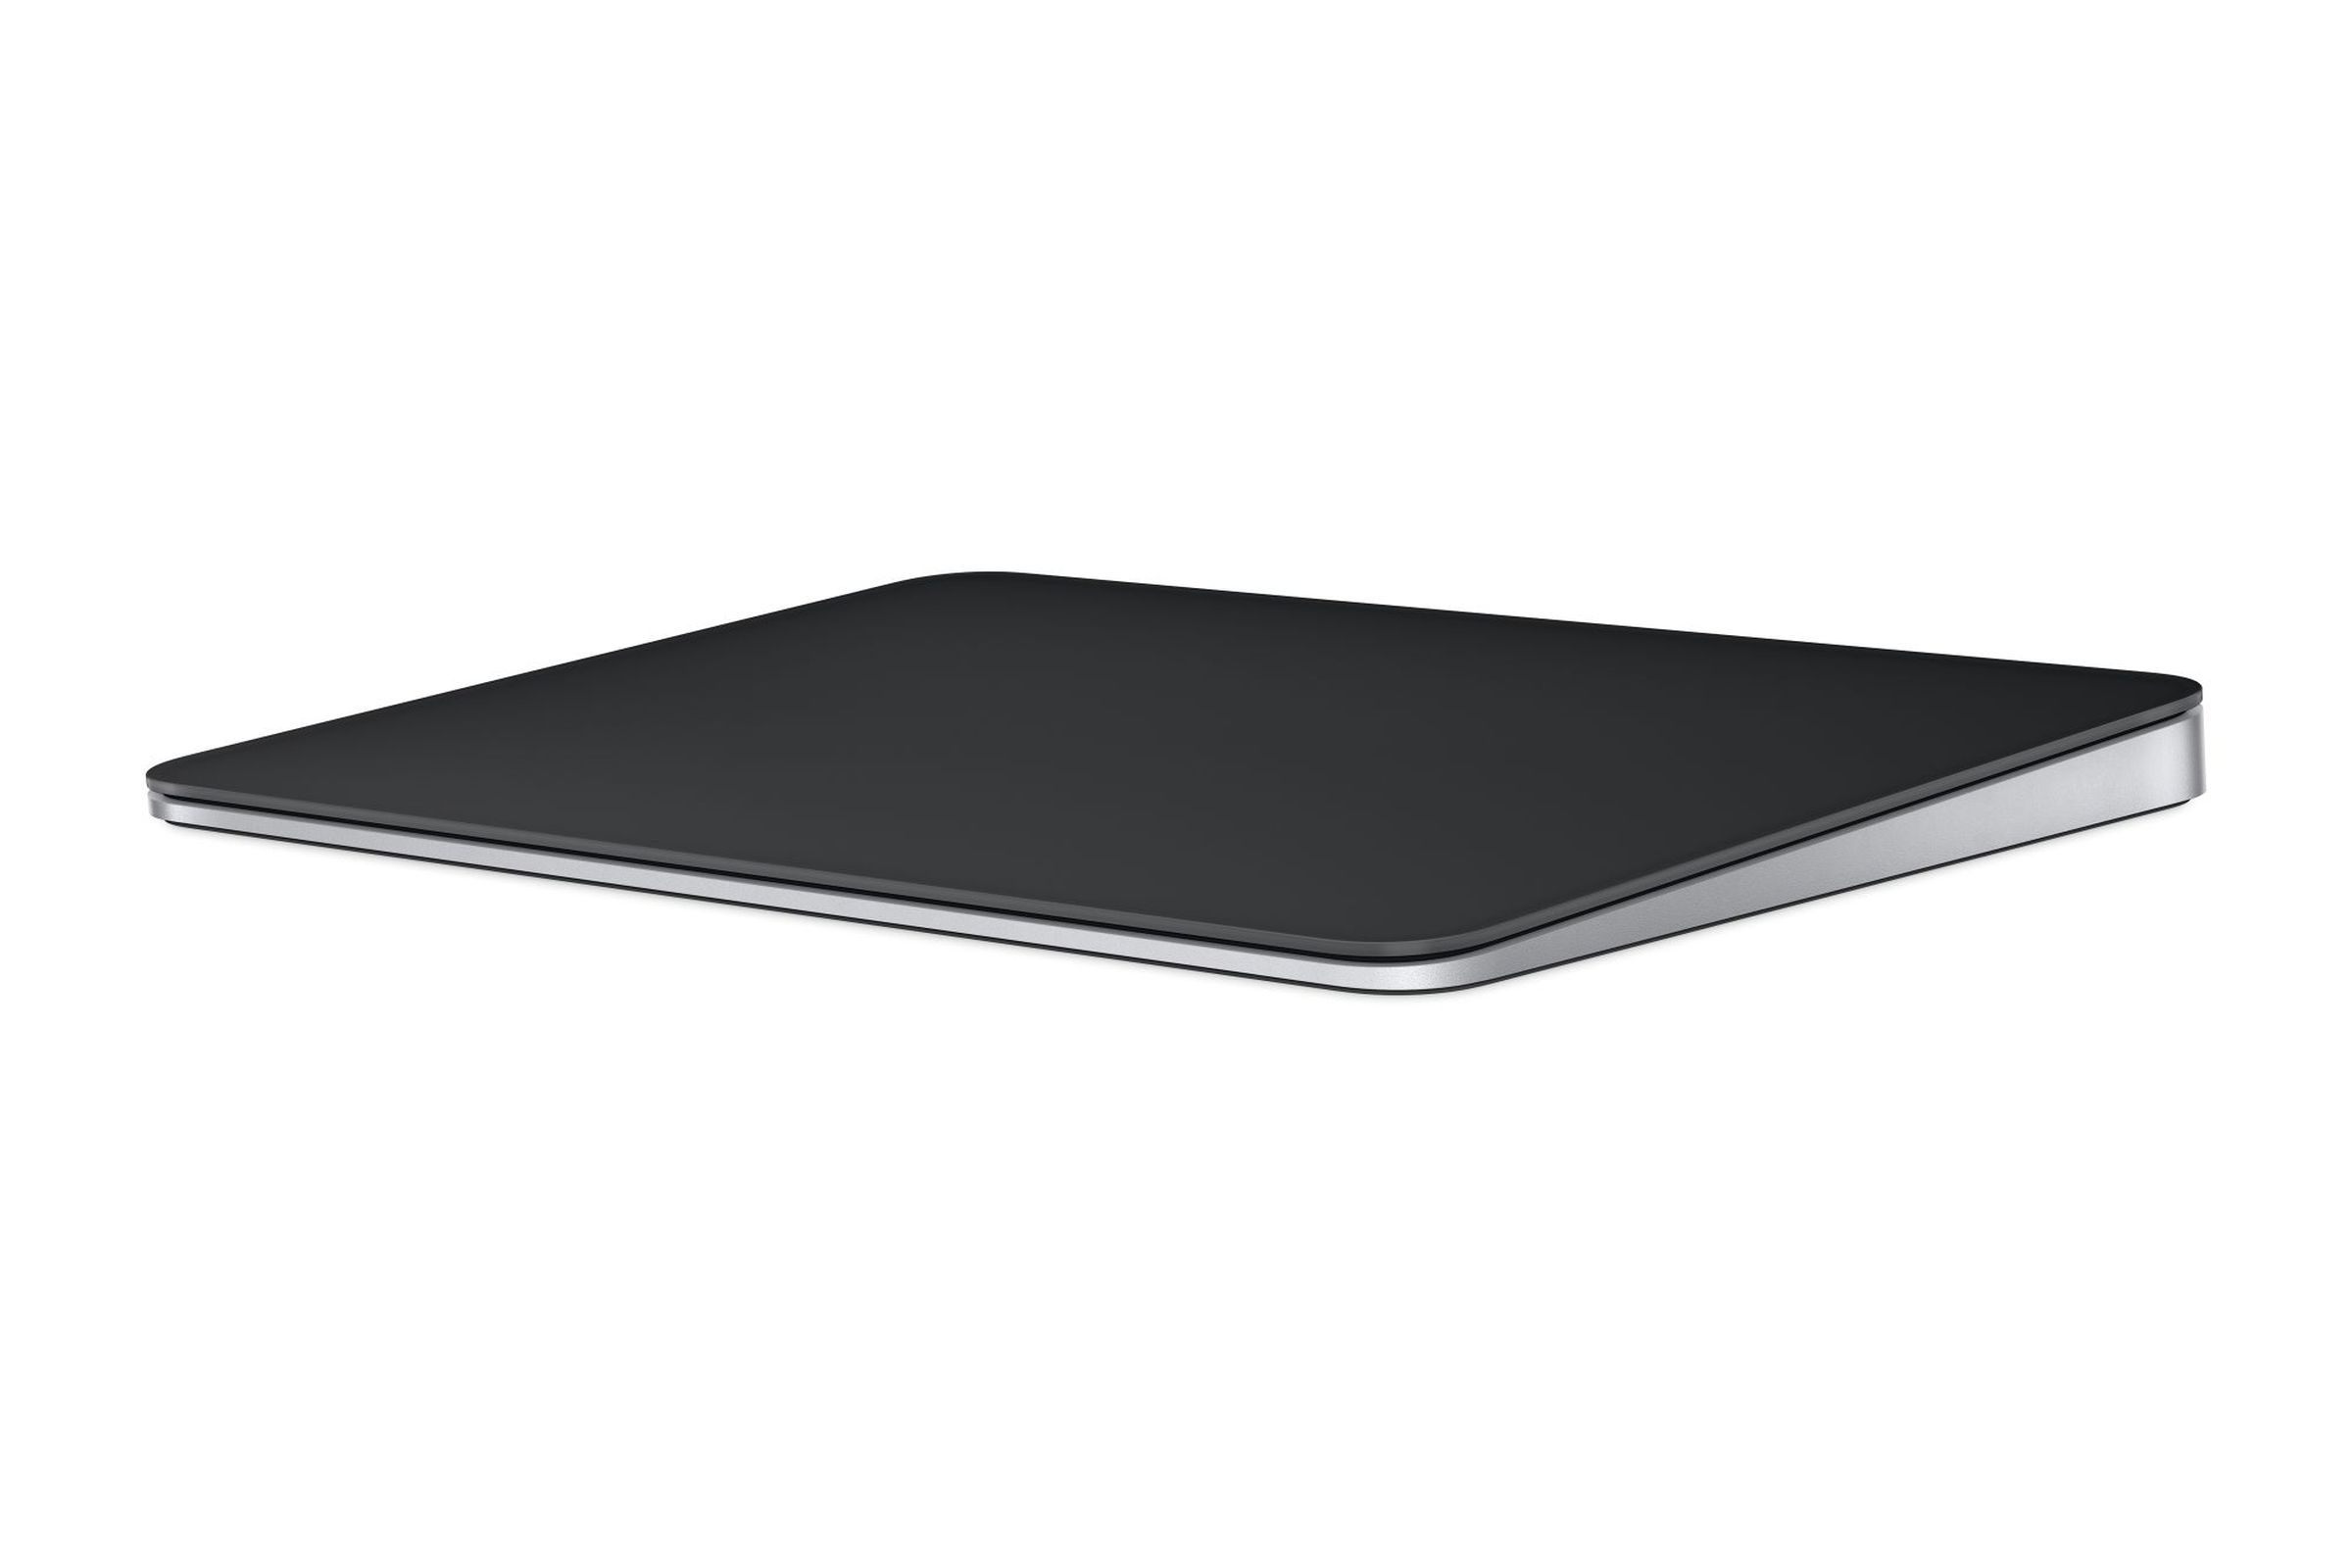 An image of the black Magic Trackpad.